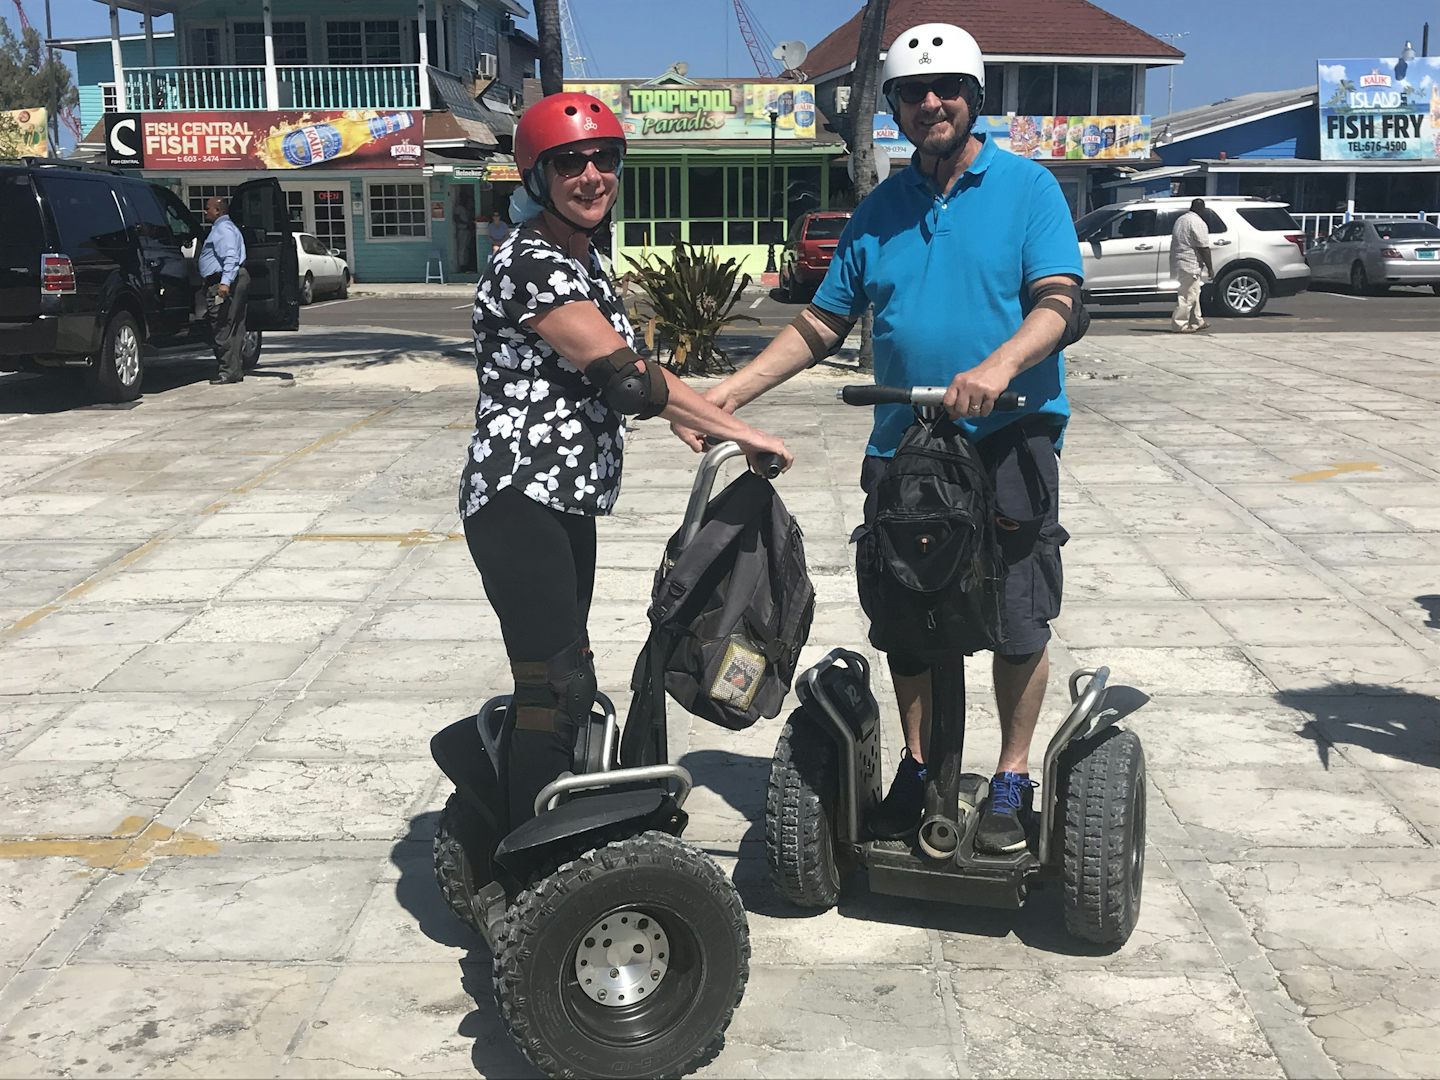 We took the Segway tour on the Nassau shore excursion! Best idea ever, wonderful time!